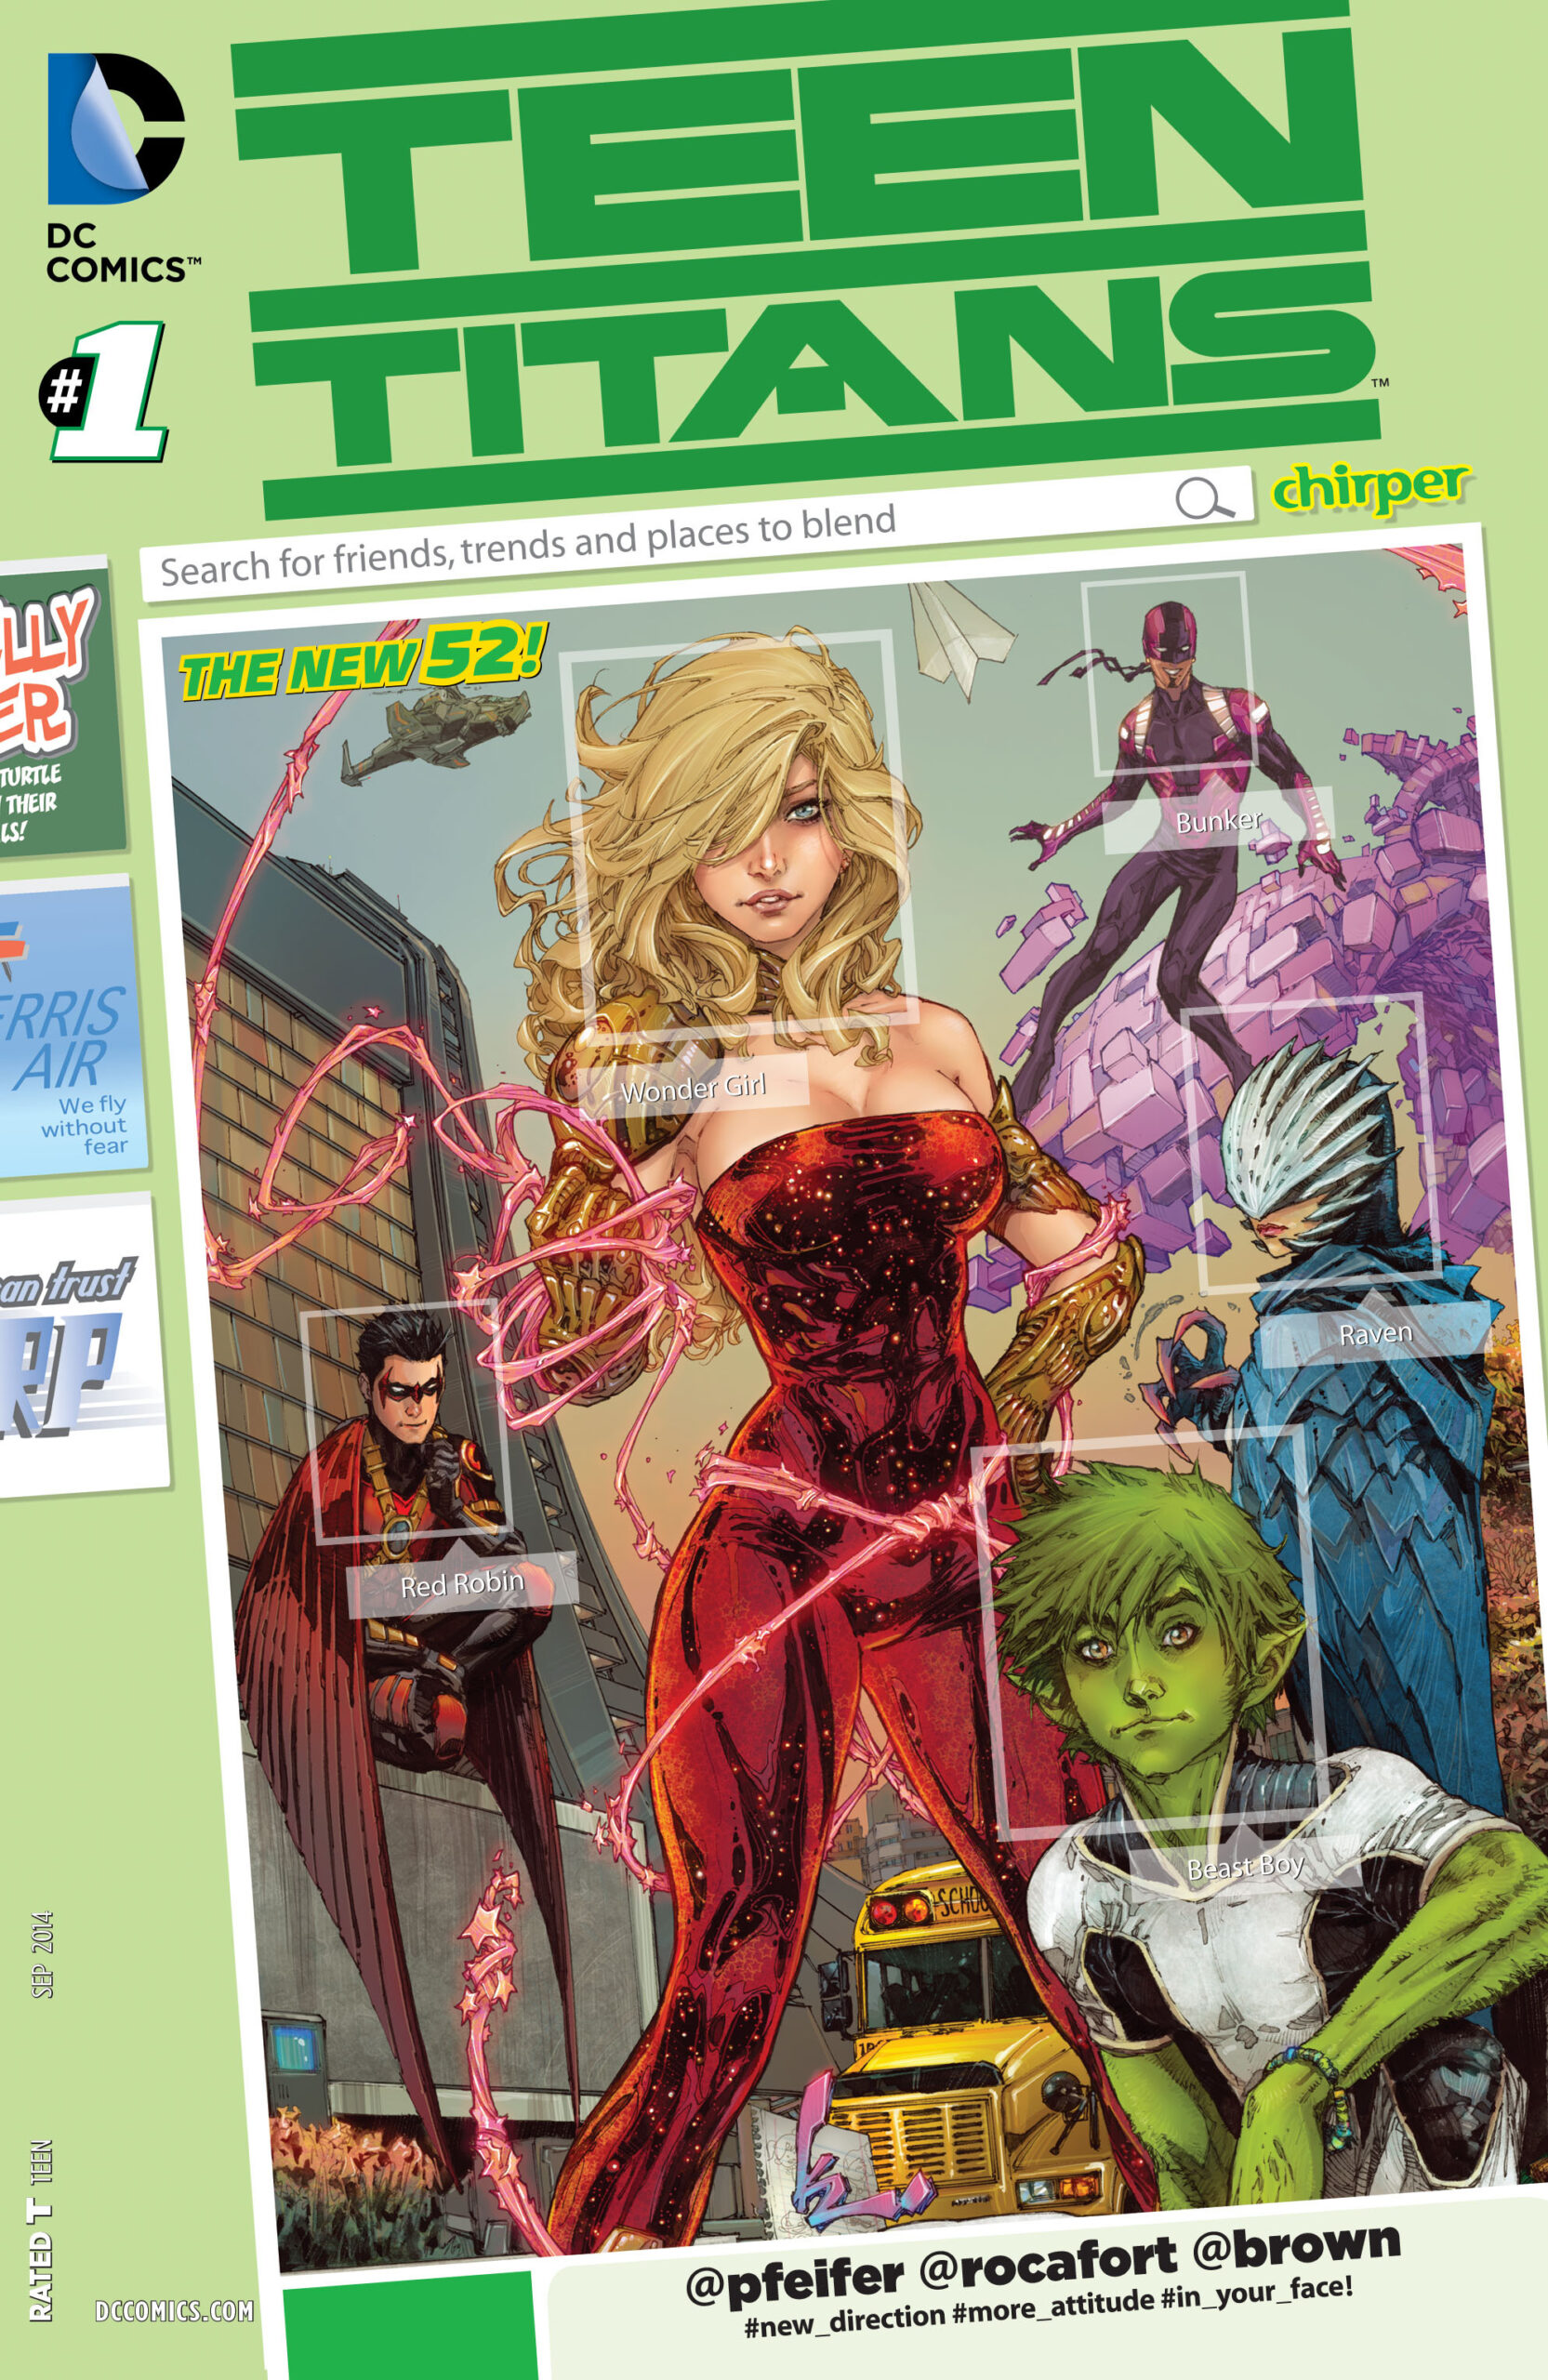 Review: DC’s Teen Titans #1